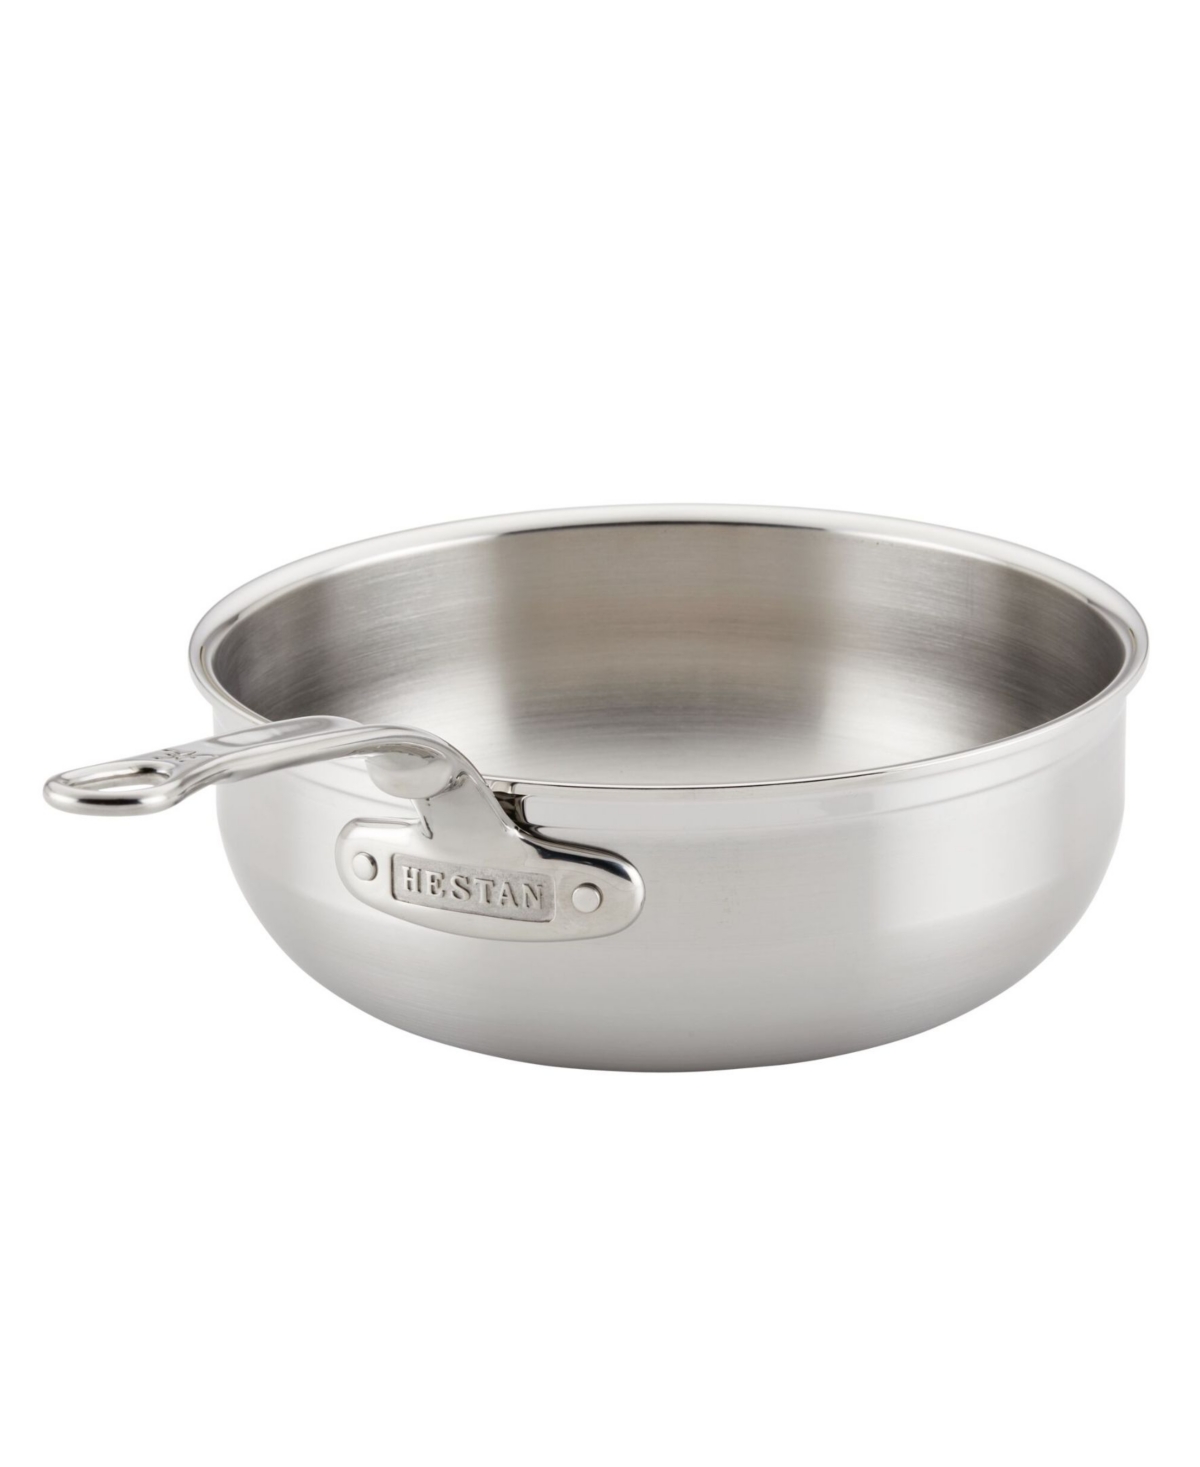 Shop Hestan Probond Clad Stainless Steel 3.5-quart Covered Essential Pan